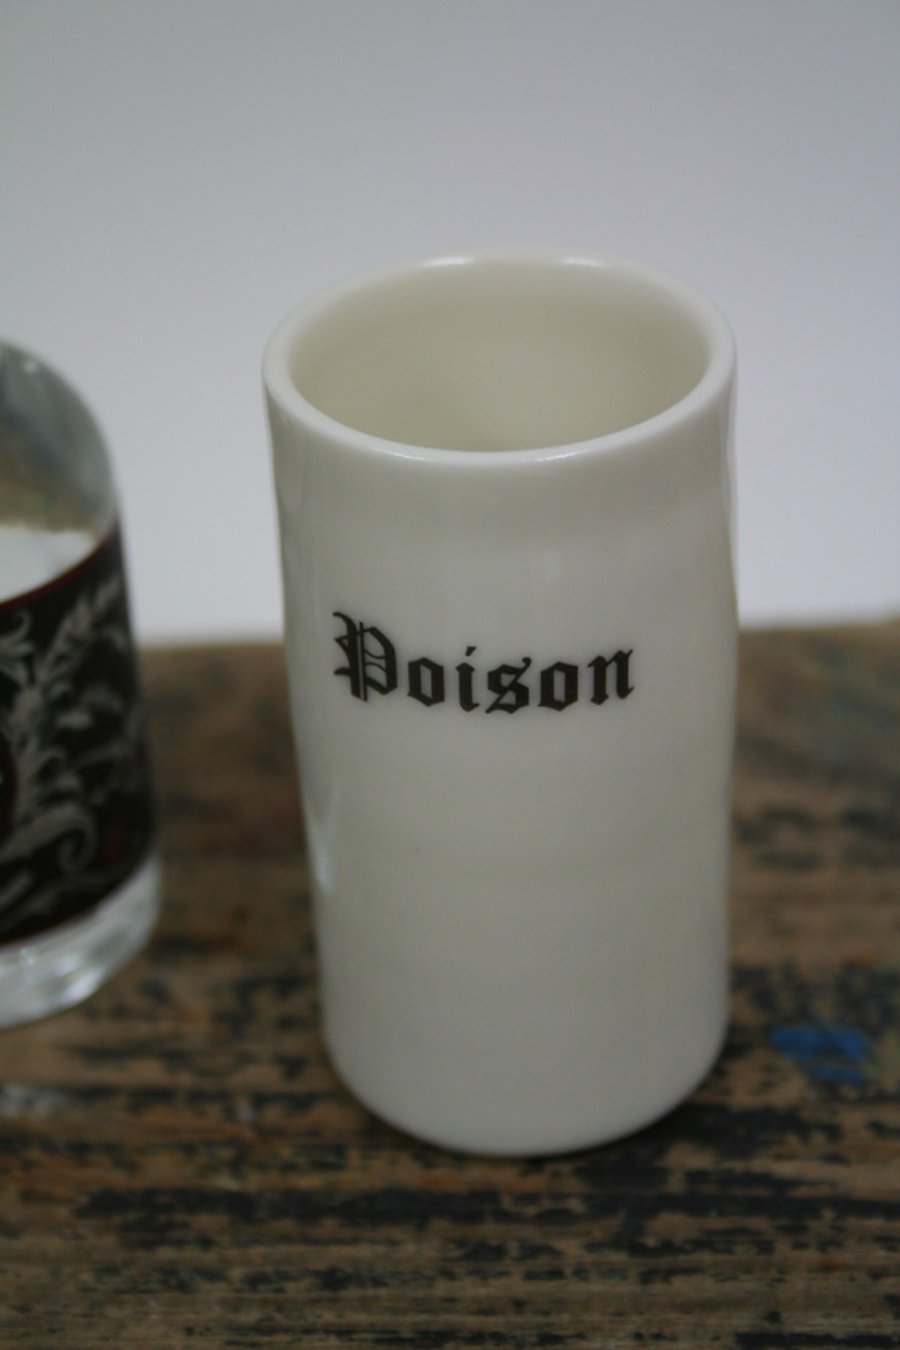 Porcelain shot 'glass' with poison wording